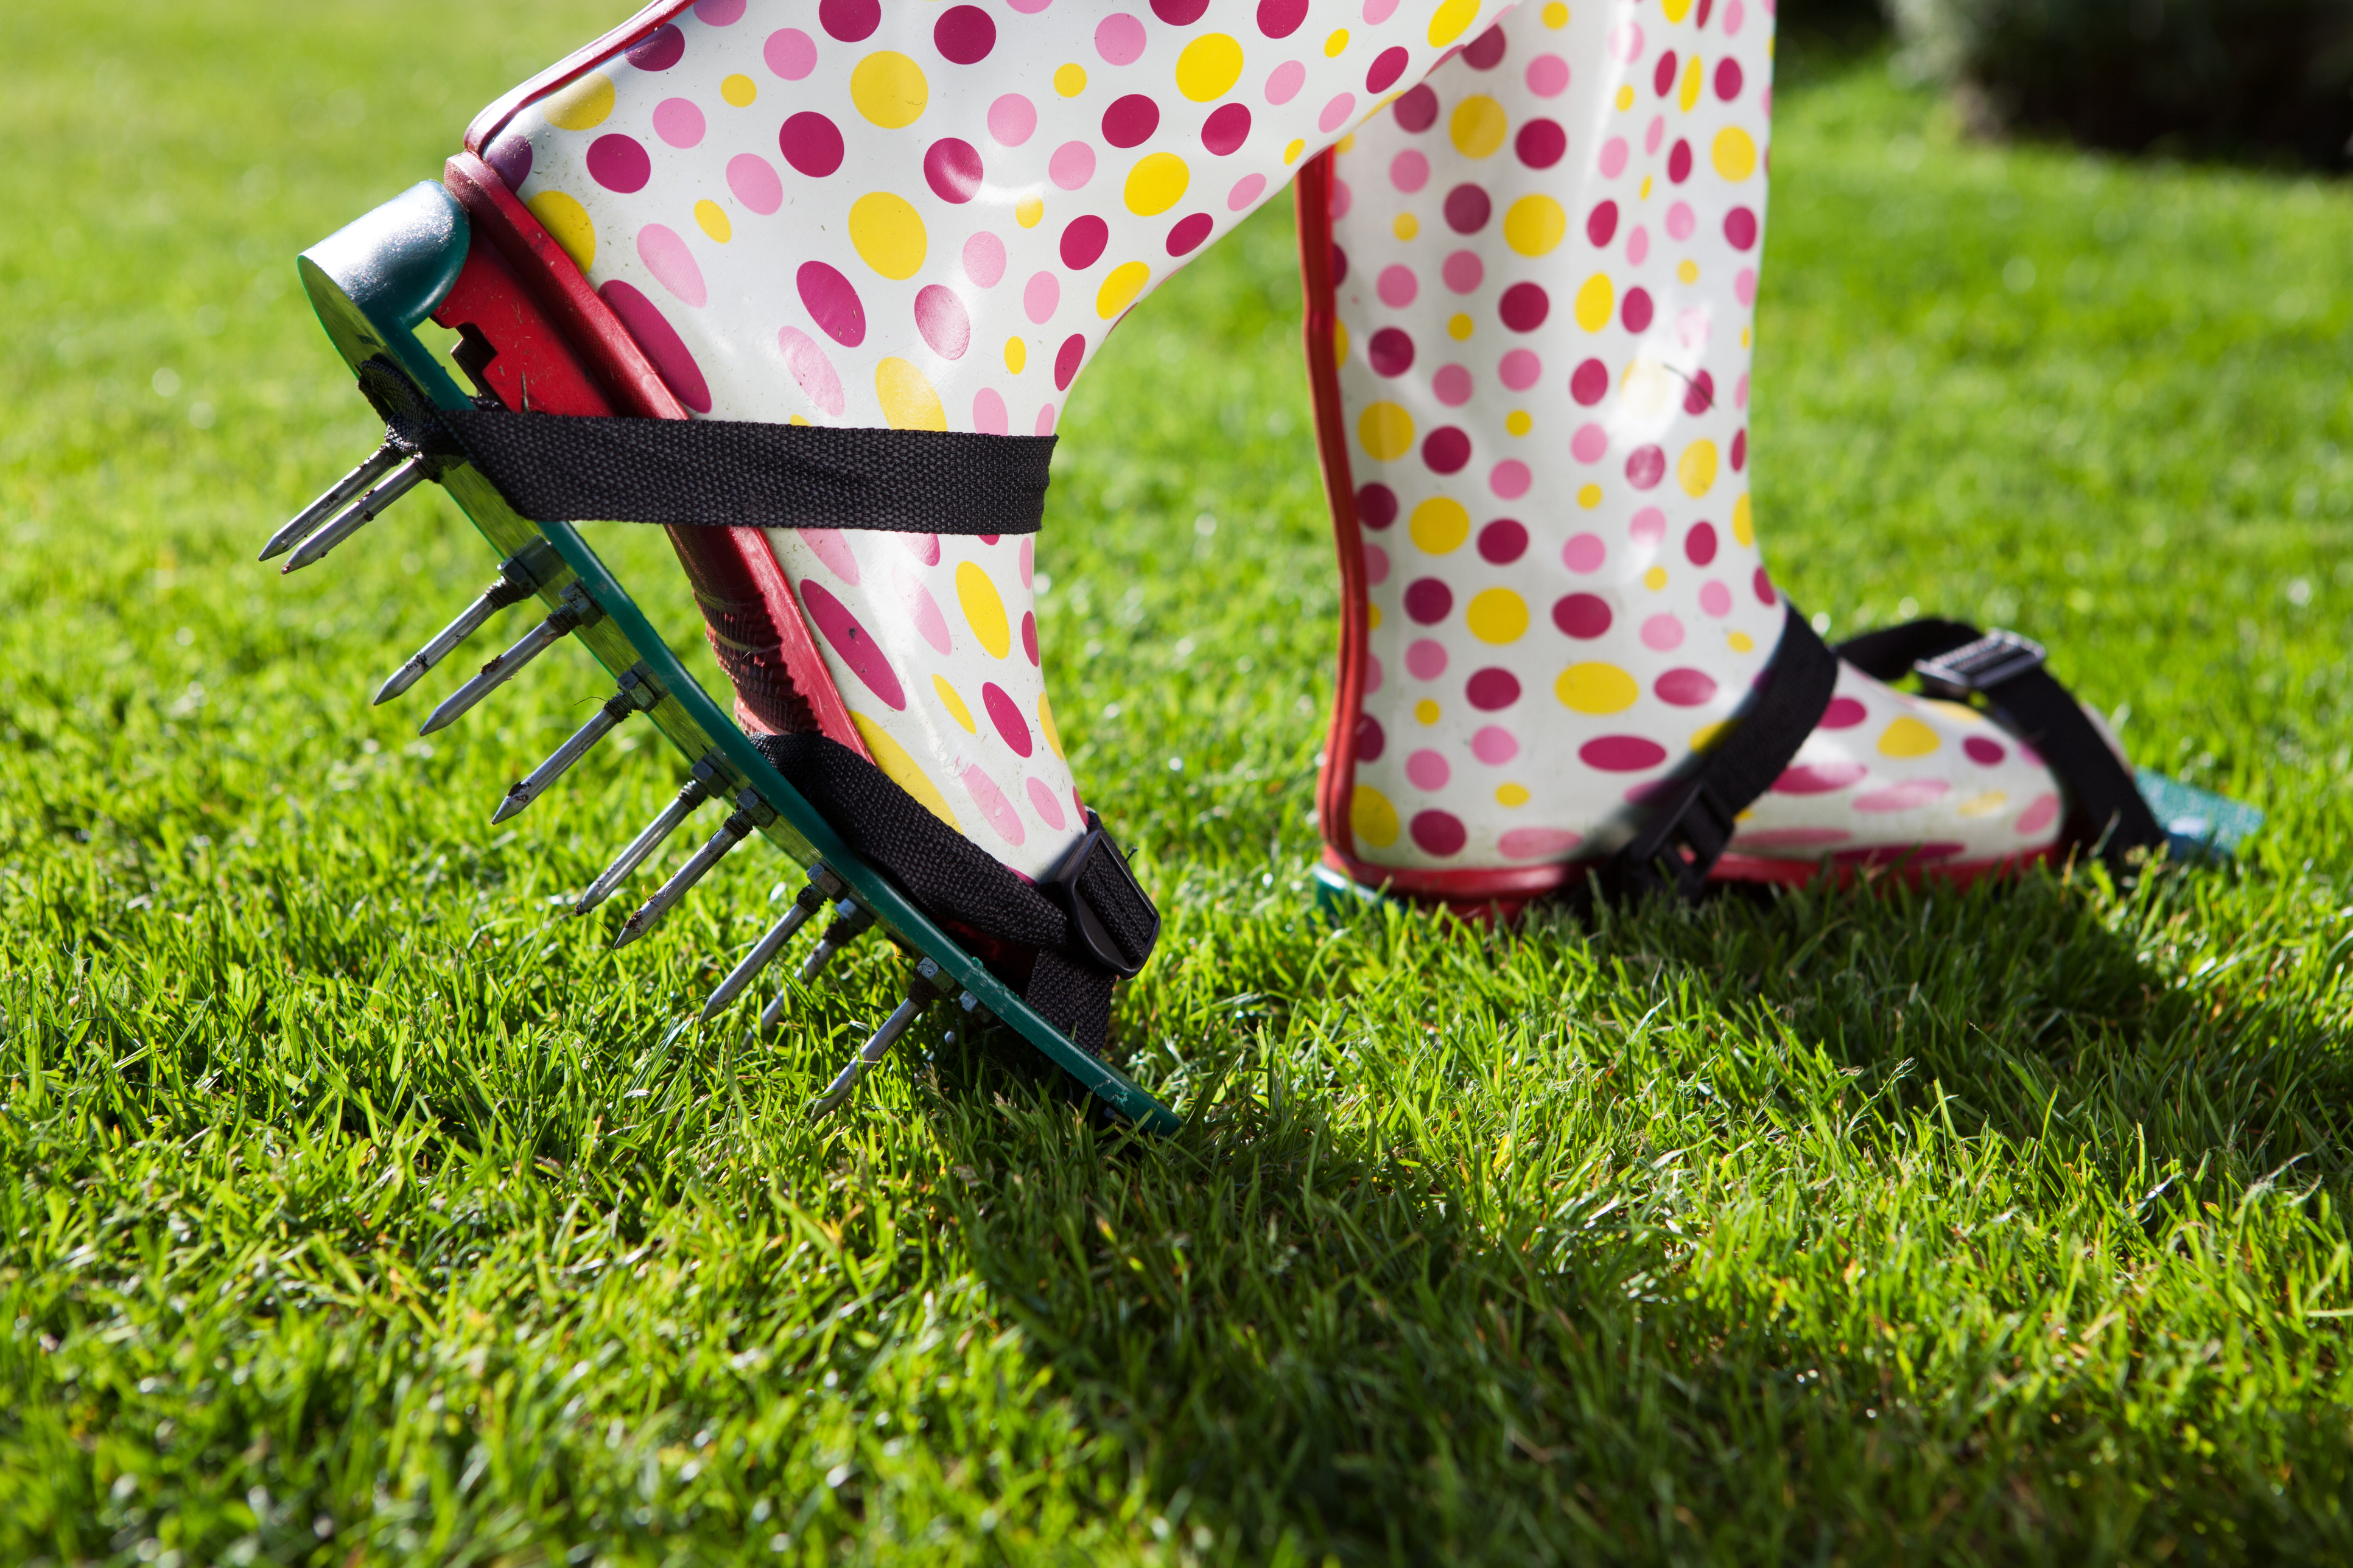 Spiked lawn shoes are an alternative (Thinkstock/PA)